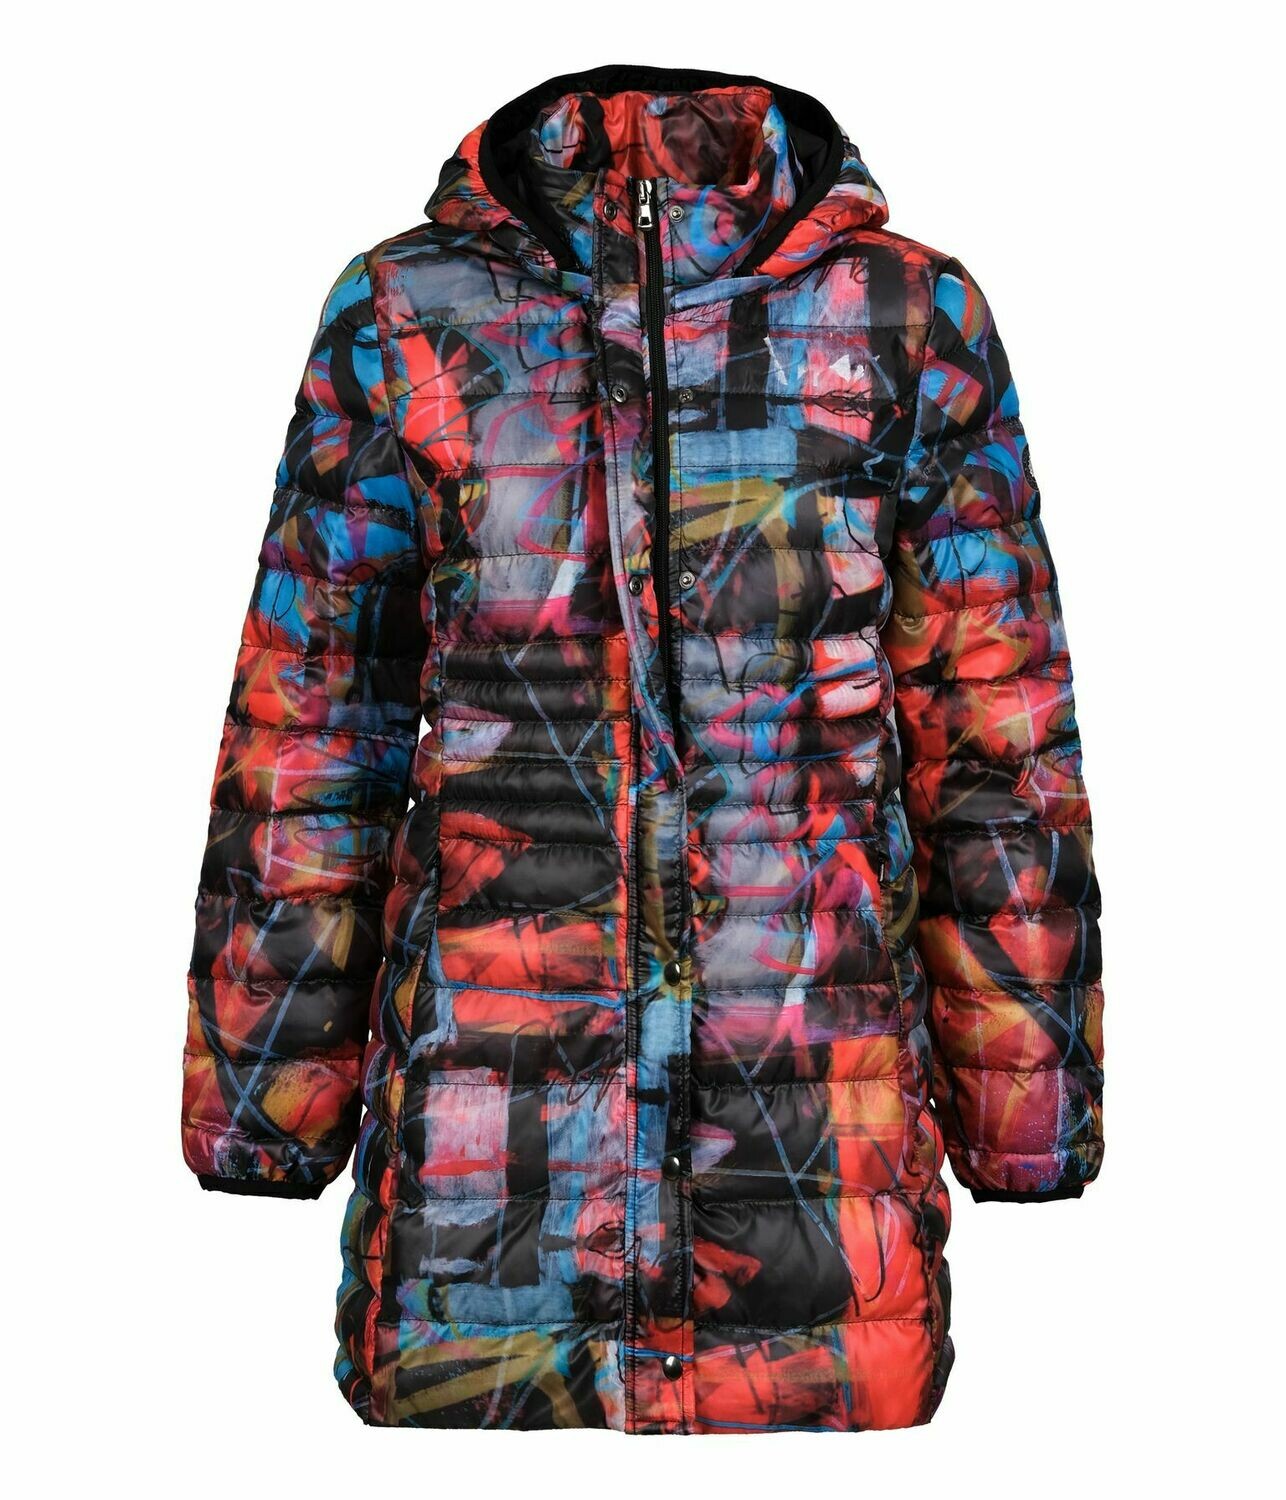 Simply Art Dolcezza: Red 3 Graffiti Abstract Art Coat (with Removable Hood!) SOLD OUT